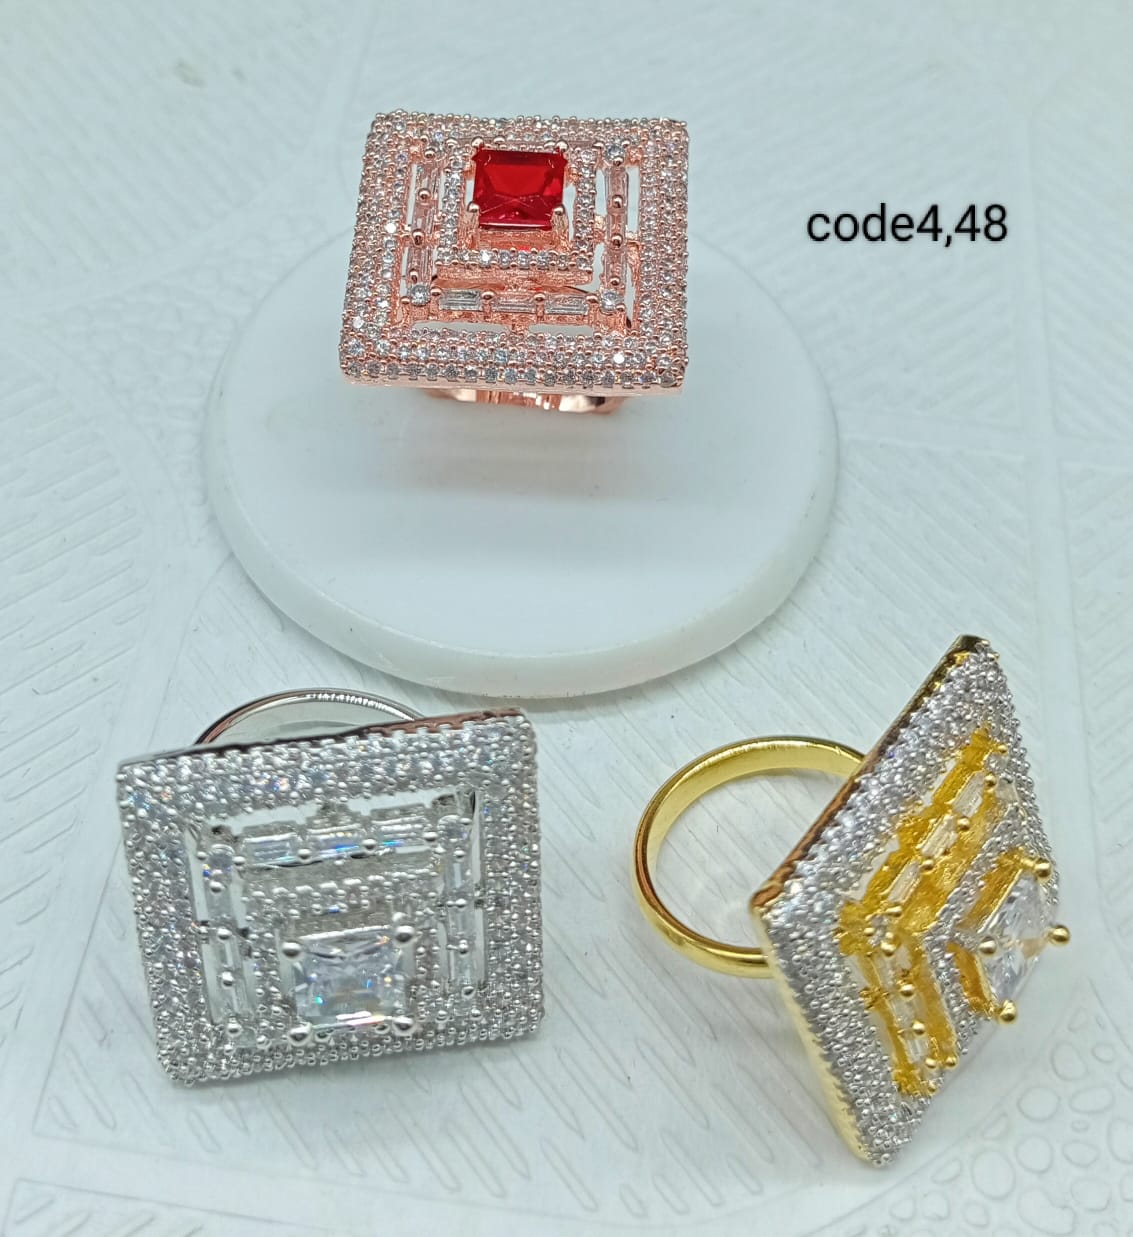 Radiant Square: Adjustable American Diamond Studded Designer Rings in Rose Gold, Gold and Silver